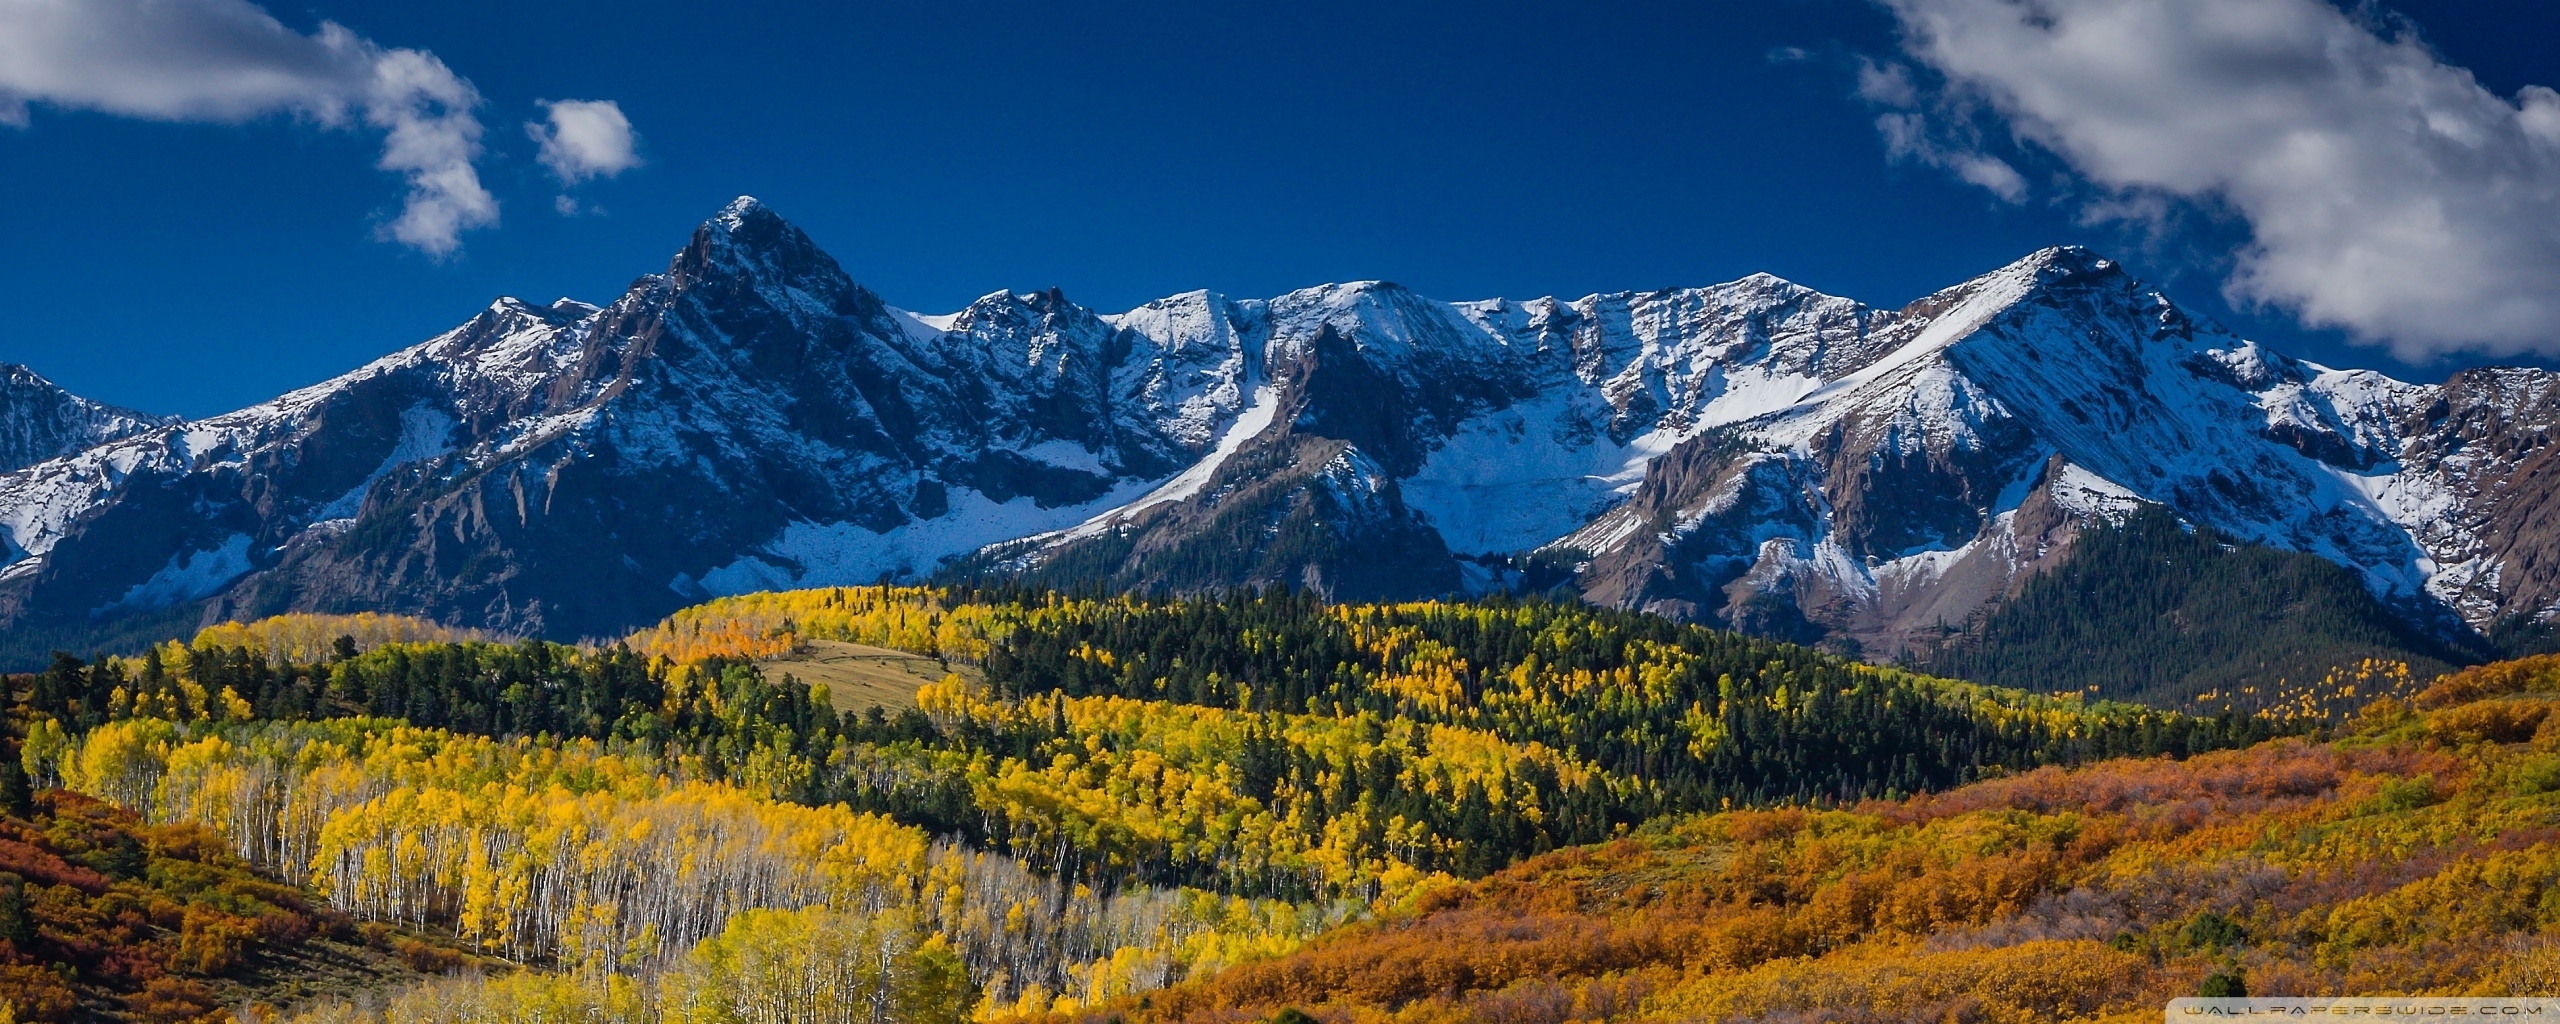 10 Latest Colorado Rocky Mountains Wallpaper Full Hd 1920×1080 For Pc